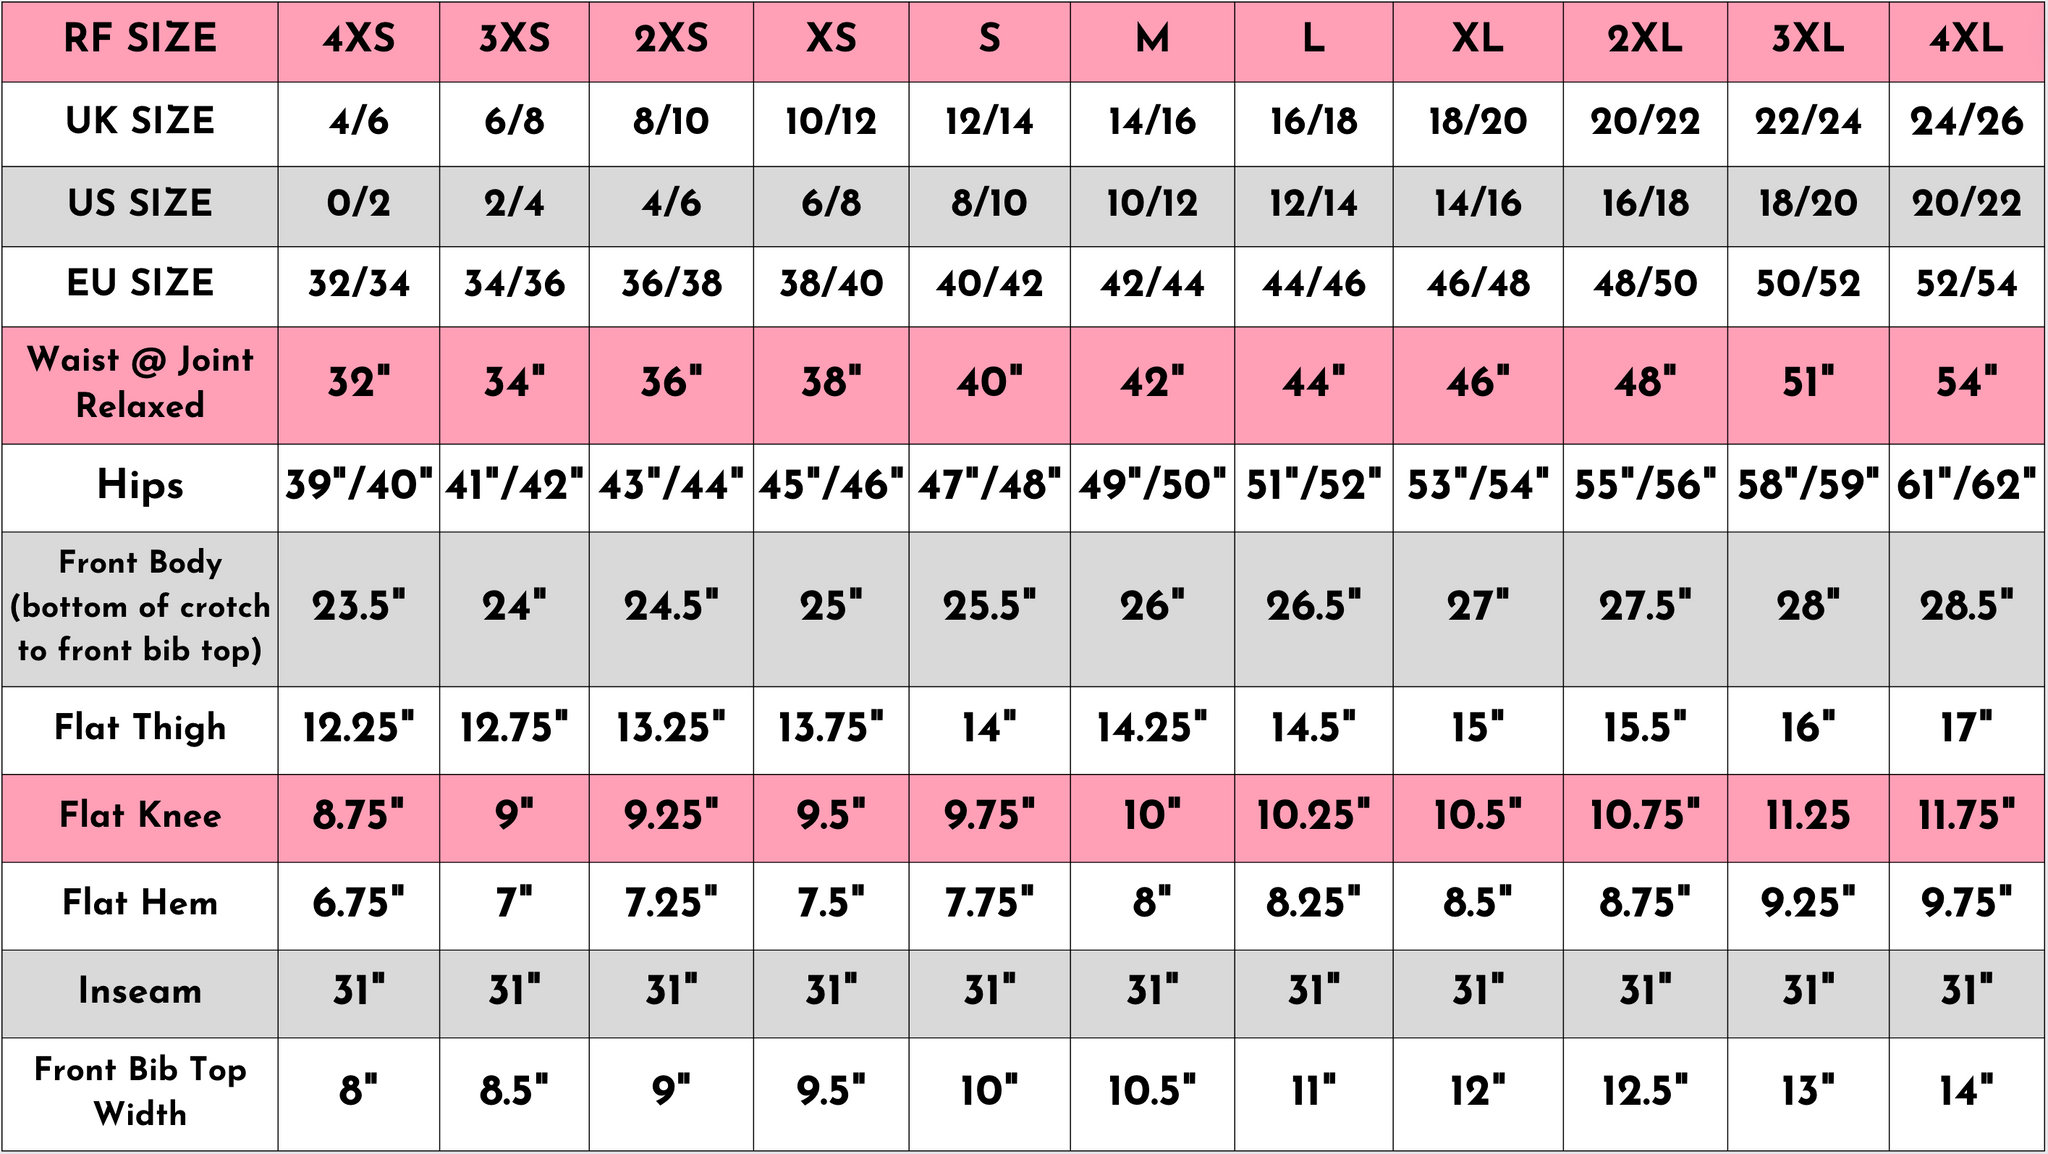 Size guide size chart measurements in inches of the Run and Fly Black and viva magenta checkerboard check print stretch twill dungarees.